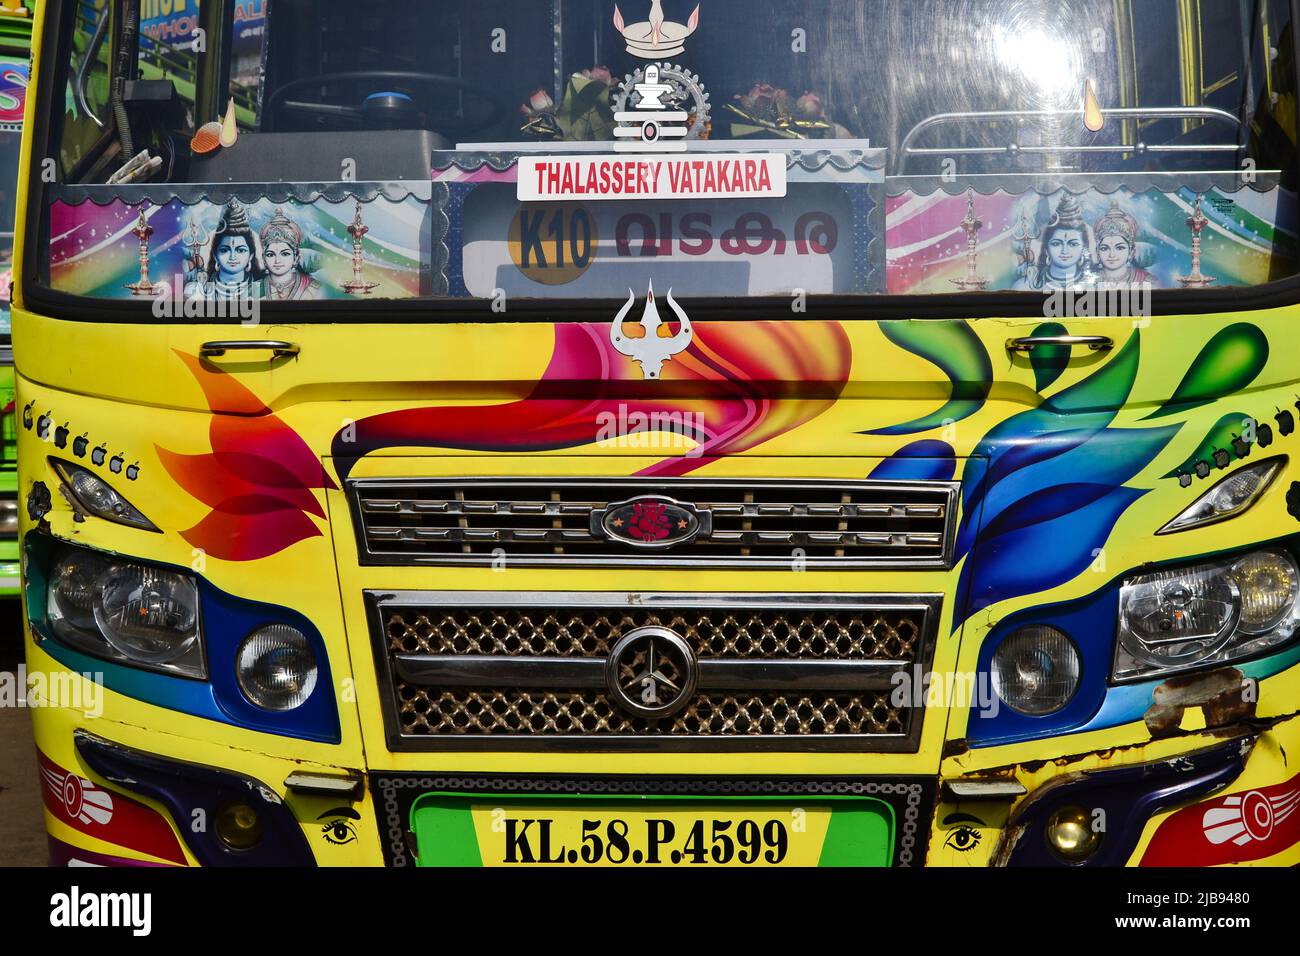 Thalassery, India - January, 2017: Front view of colorful Indian Mercedes bus making route from Thalassery to Vatakara. Headlights and Radiator grill Stock Photo